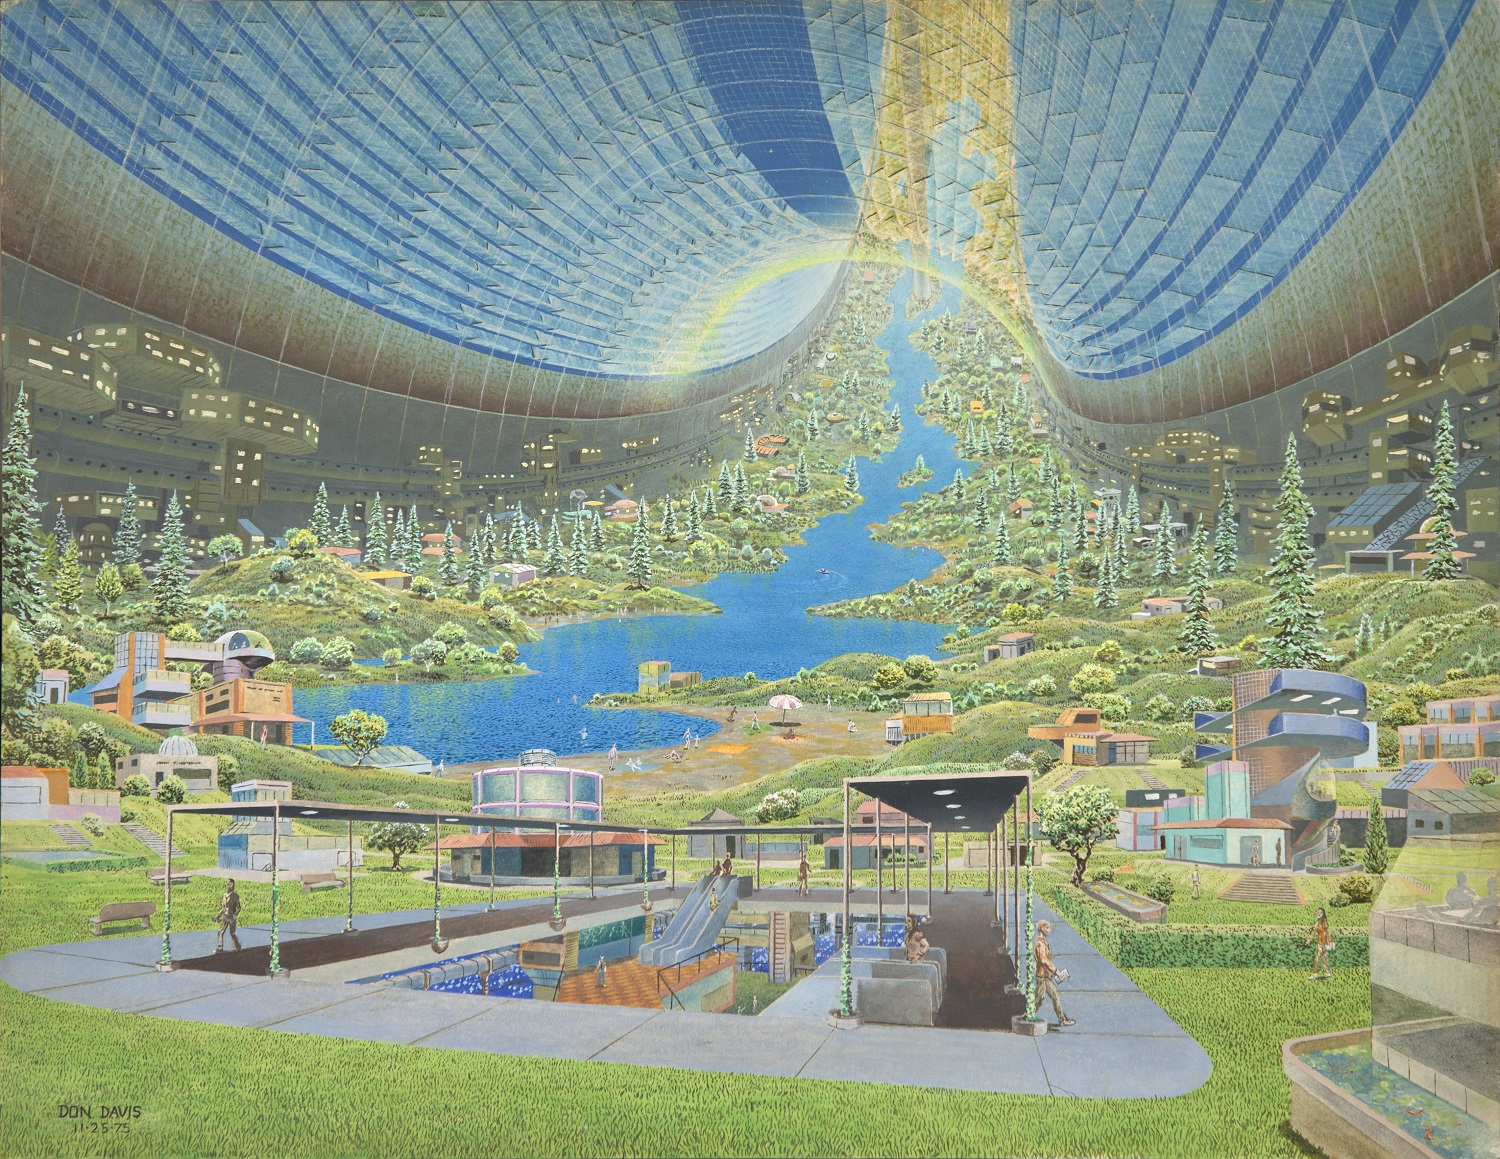 Don Davis (American, born 1952). Stanford torus interior view. 1975. Acrylic on board, 17 × 22″ (43.1 × 55.9 cm). Commissioned by NASA for Richard D. Johnson and Charles Holbrow, eds., Space Settlements: A Design Study (Washington, DC: NASA Scientific and Technical Information Office, 1977). Illustration never used. Collection Don Davis